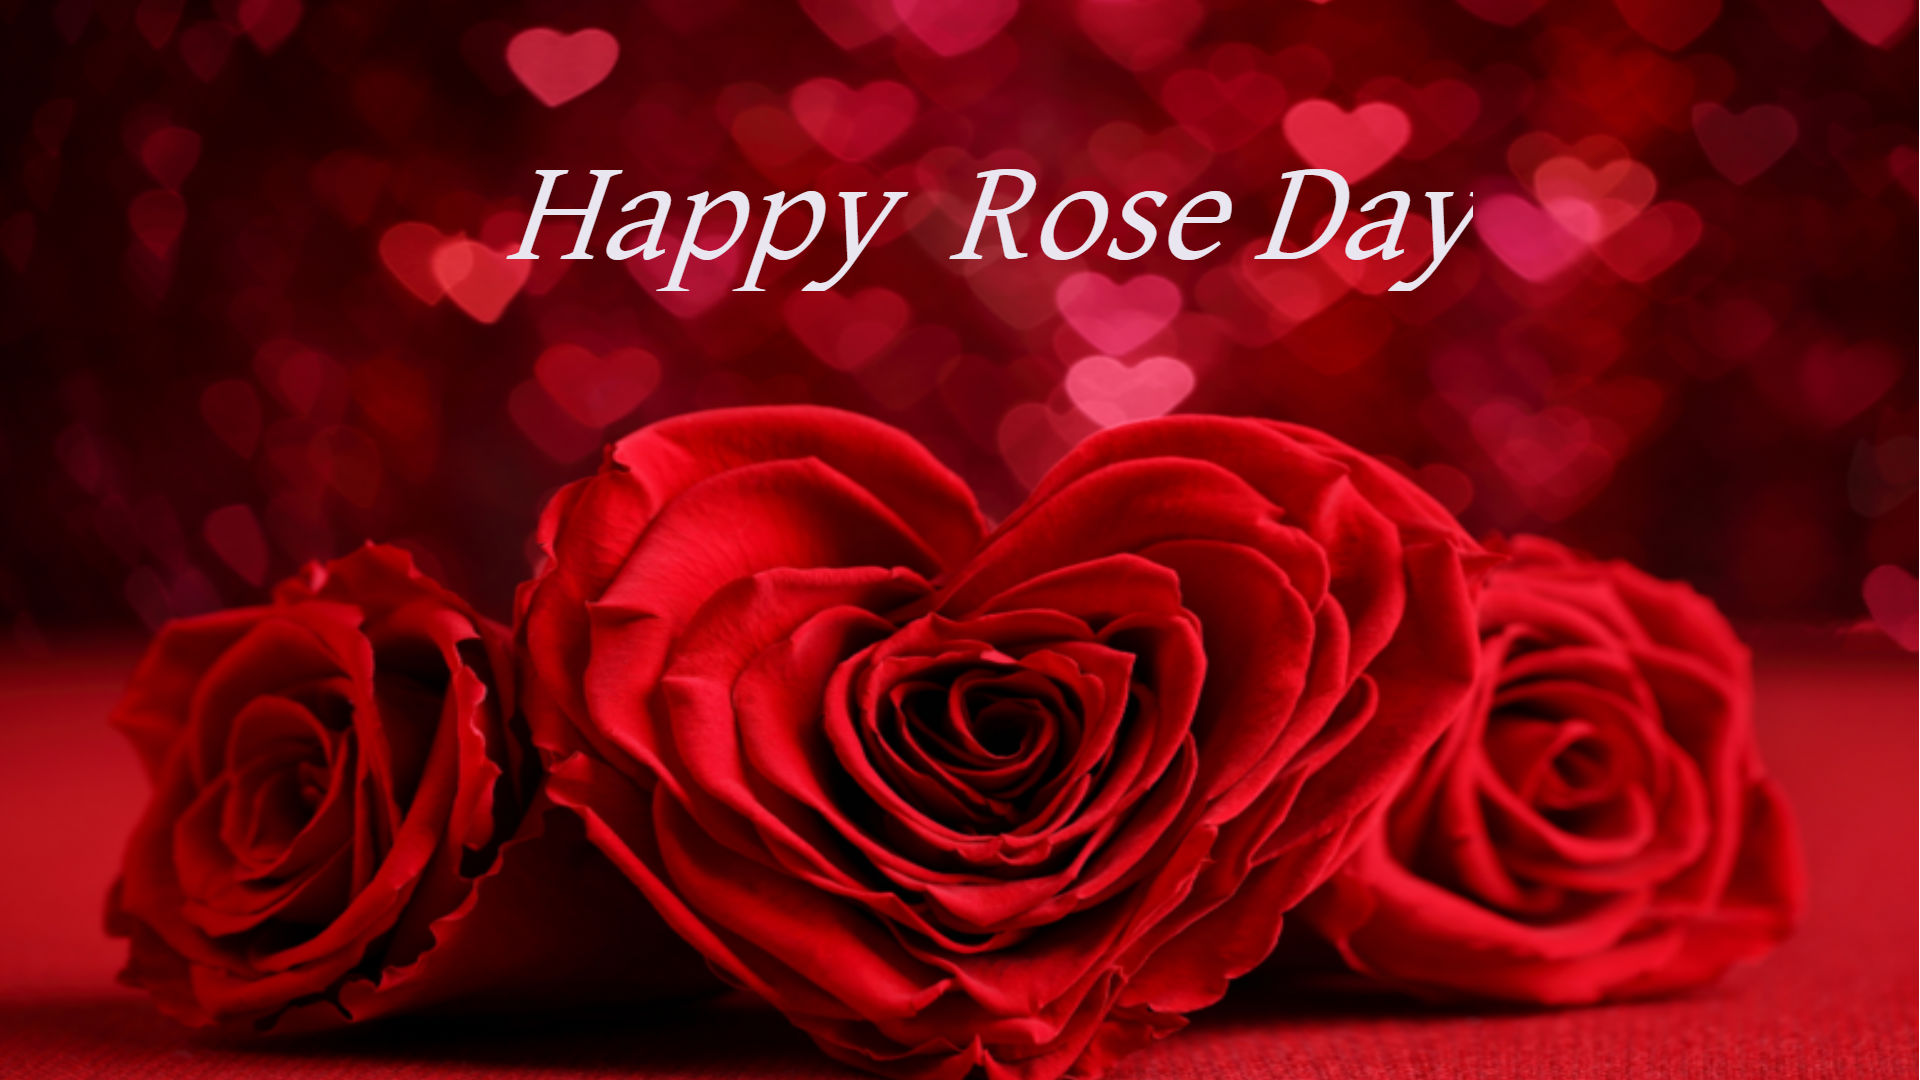 Rose Day 2020 Quotes, Wallpaper, Sms, Song